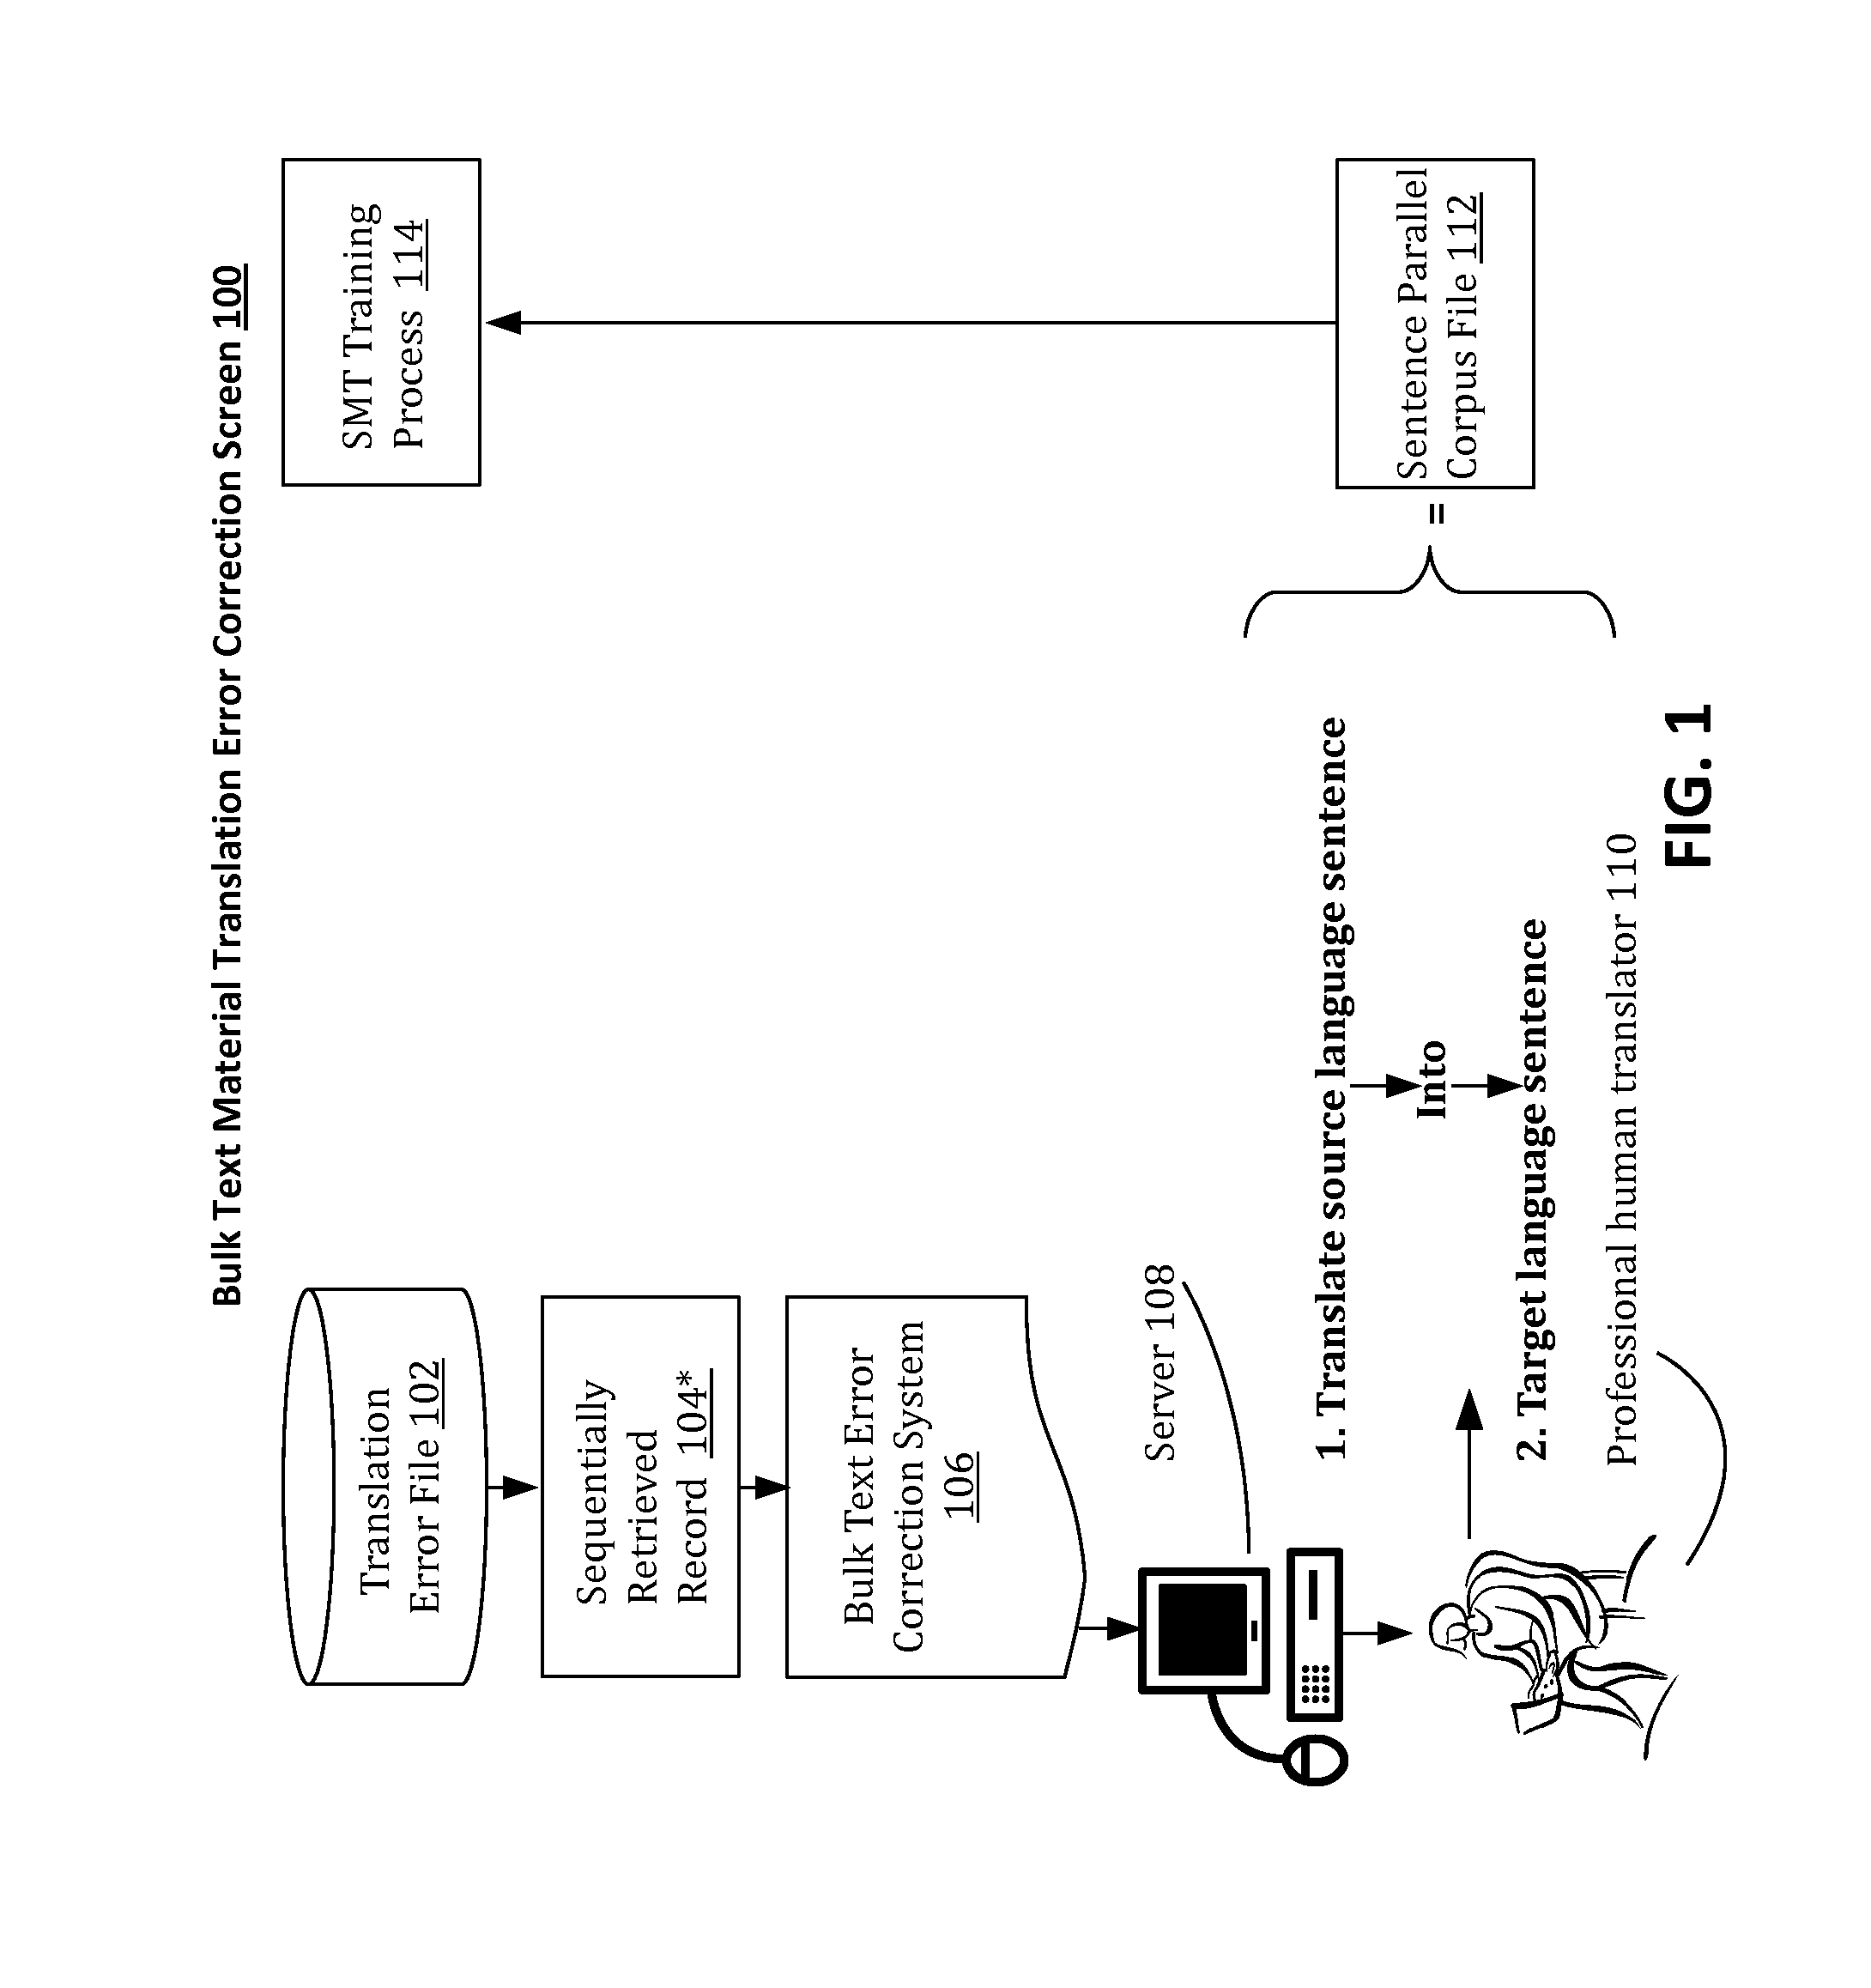 Method for Increasing the Accuracy of Subject-Specific Statistical Machine Translation (SMT)